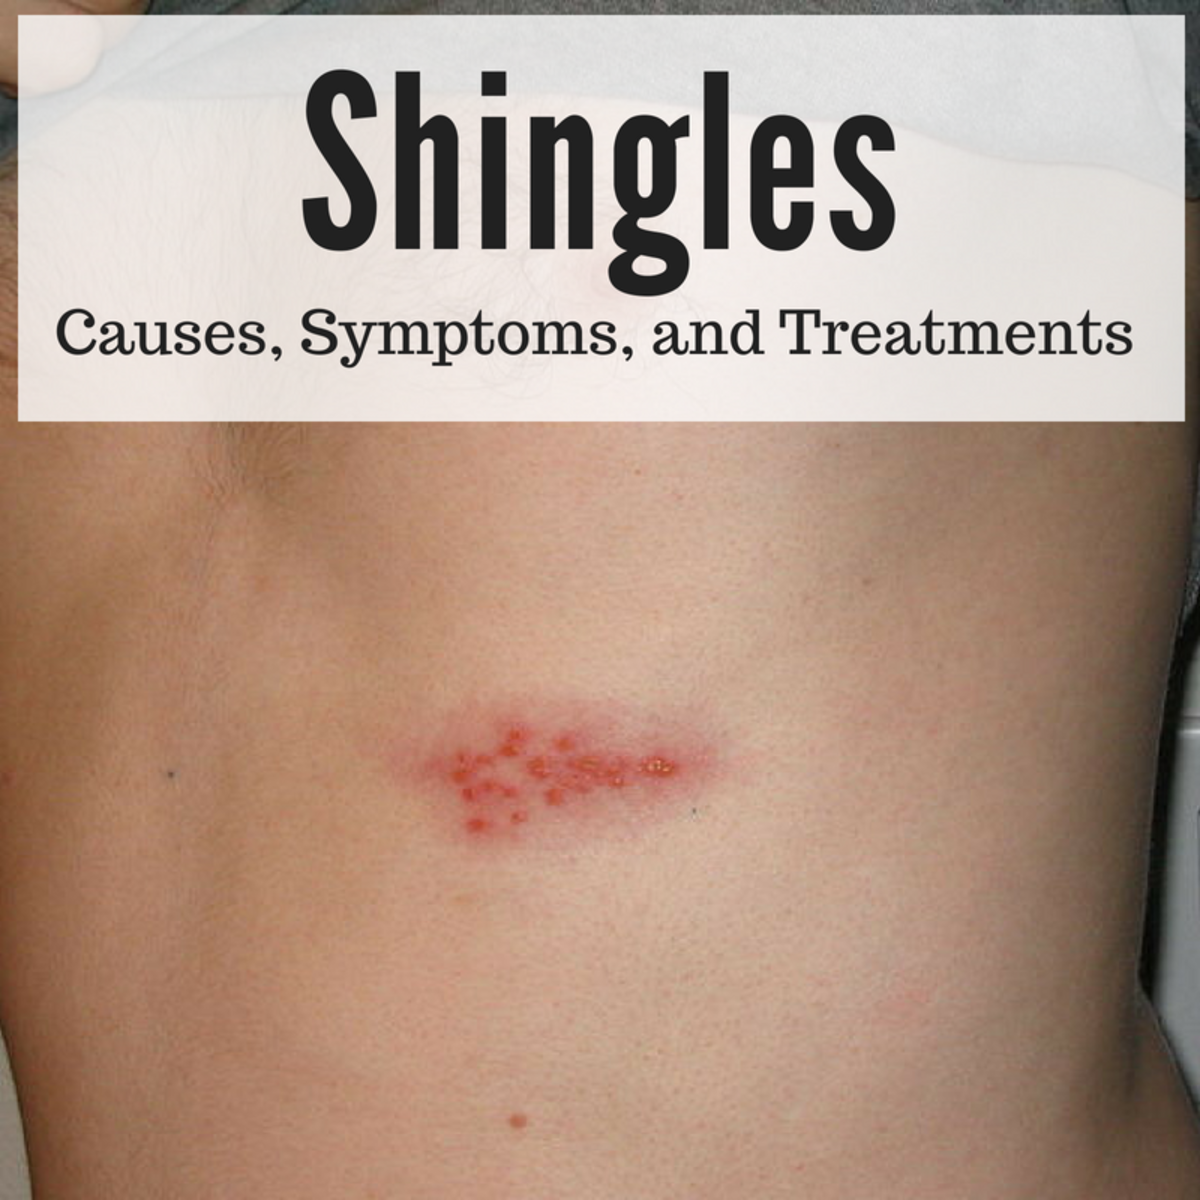 Shingles: A Serious and Painful Disease